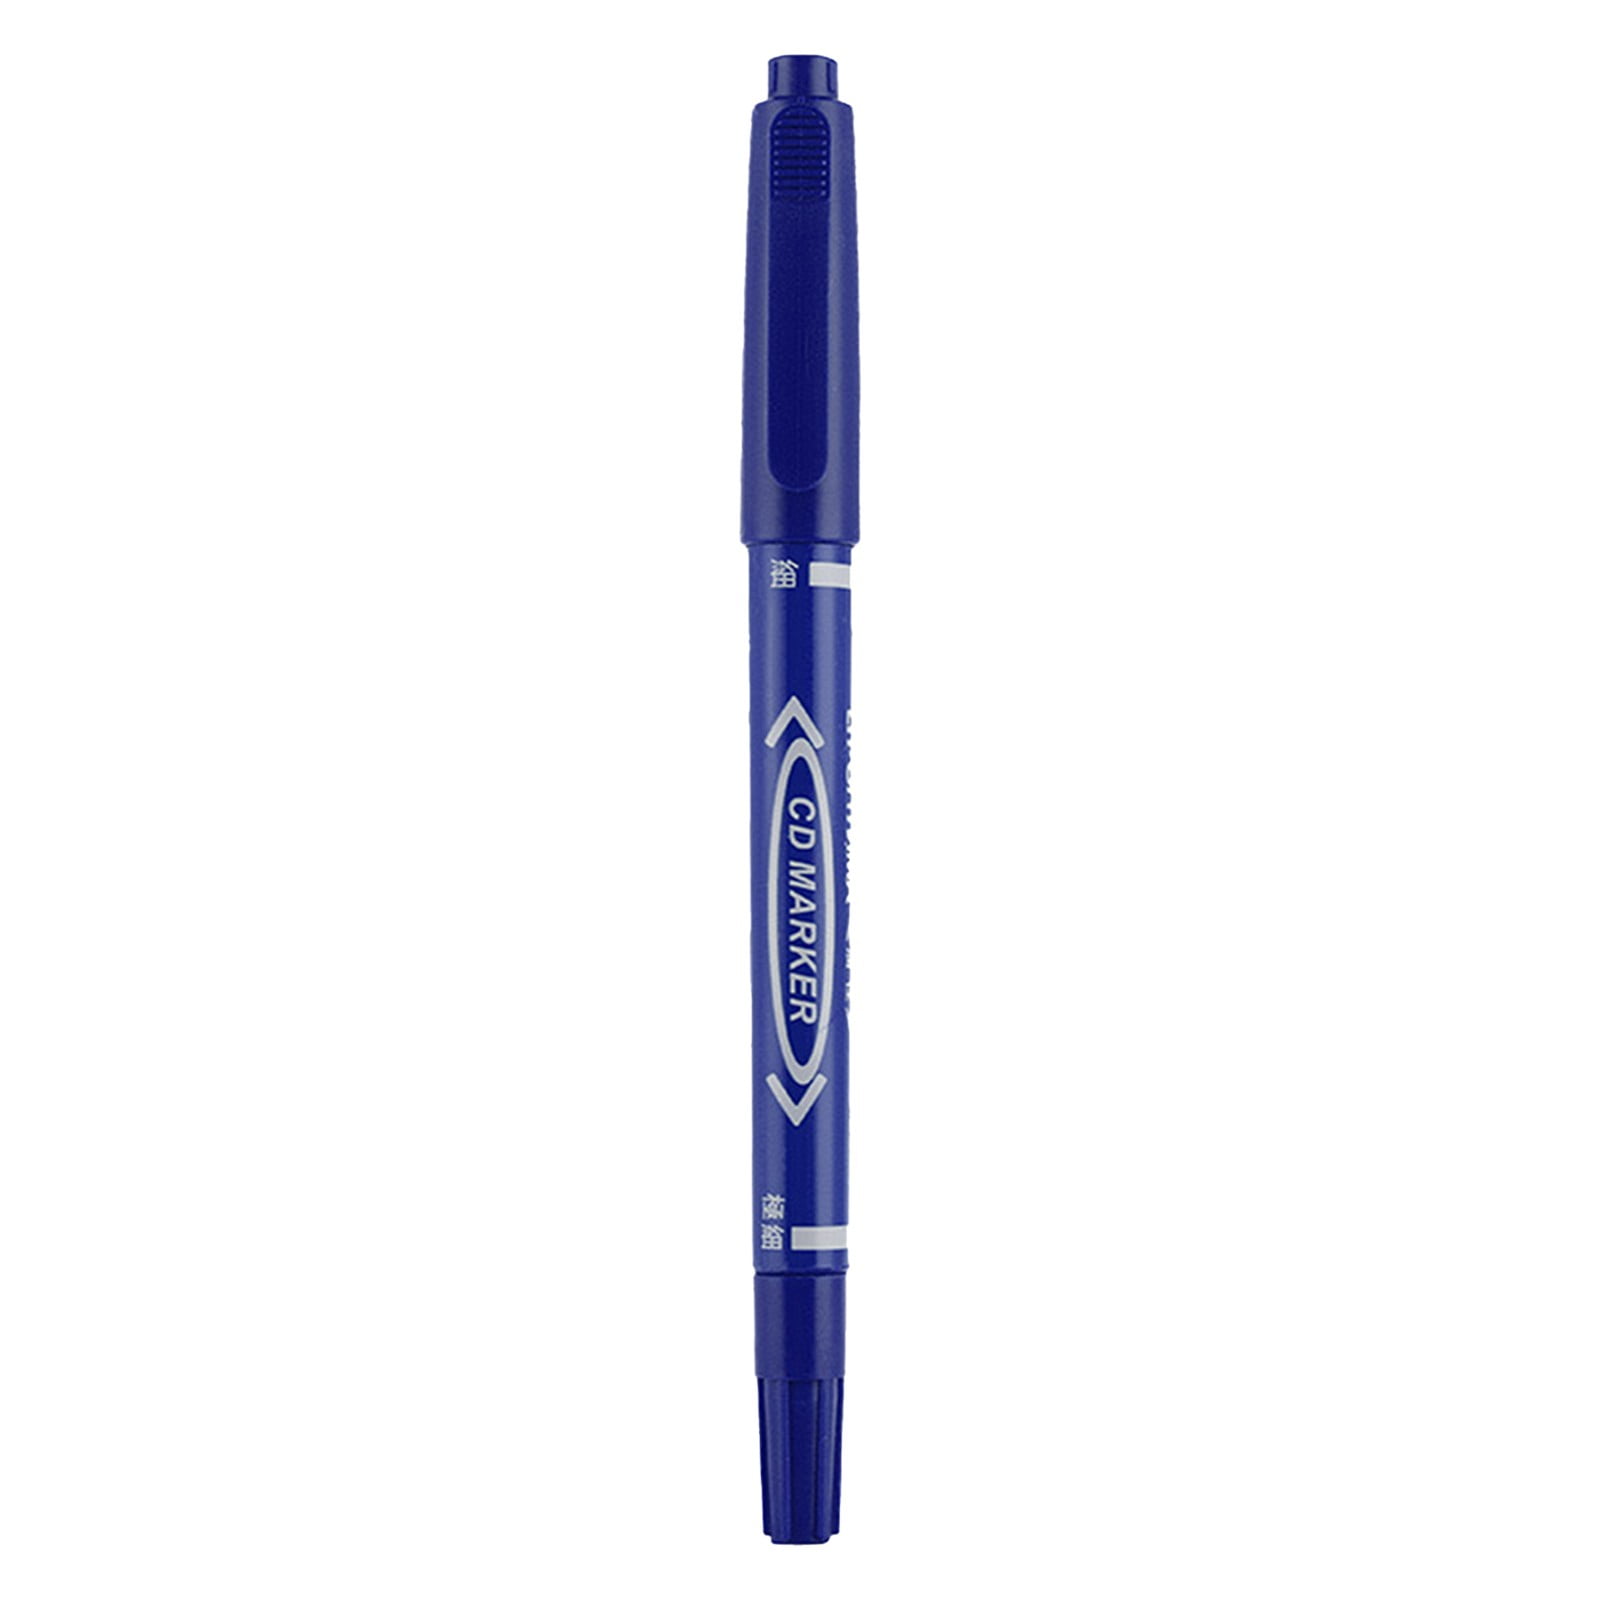 TureClos UV Light Magic Marker Invisible Ink Pen for Secret Message Spy  Game Party 